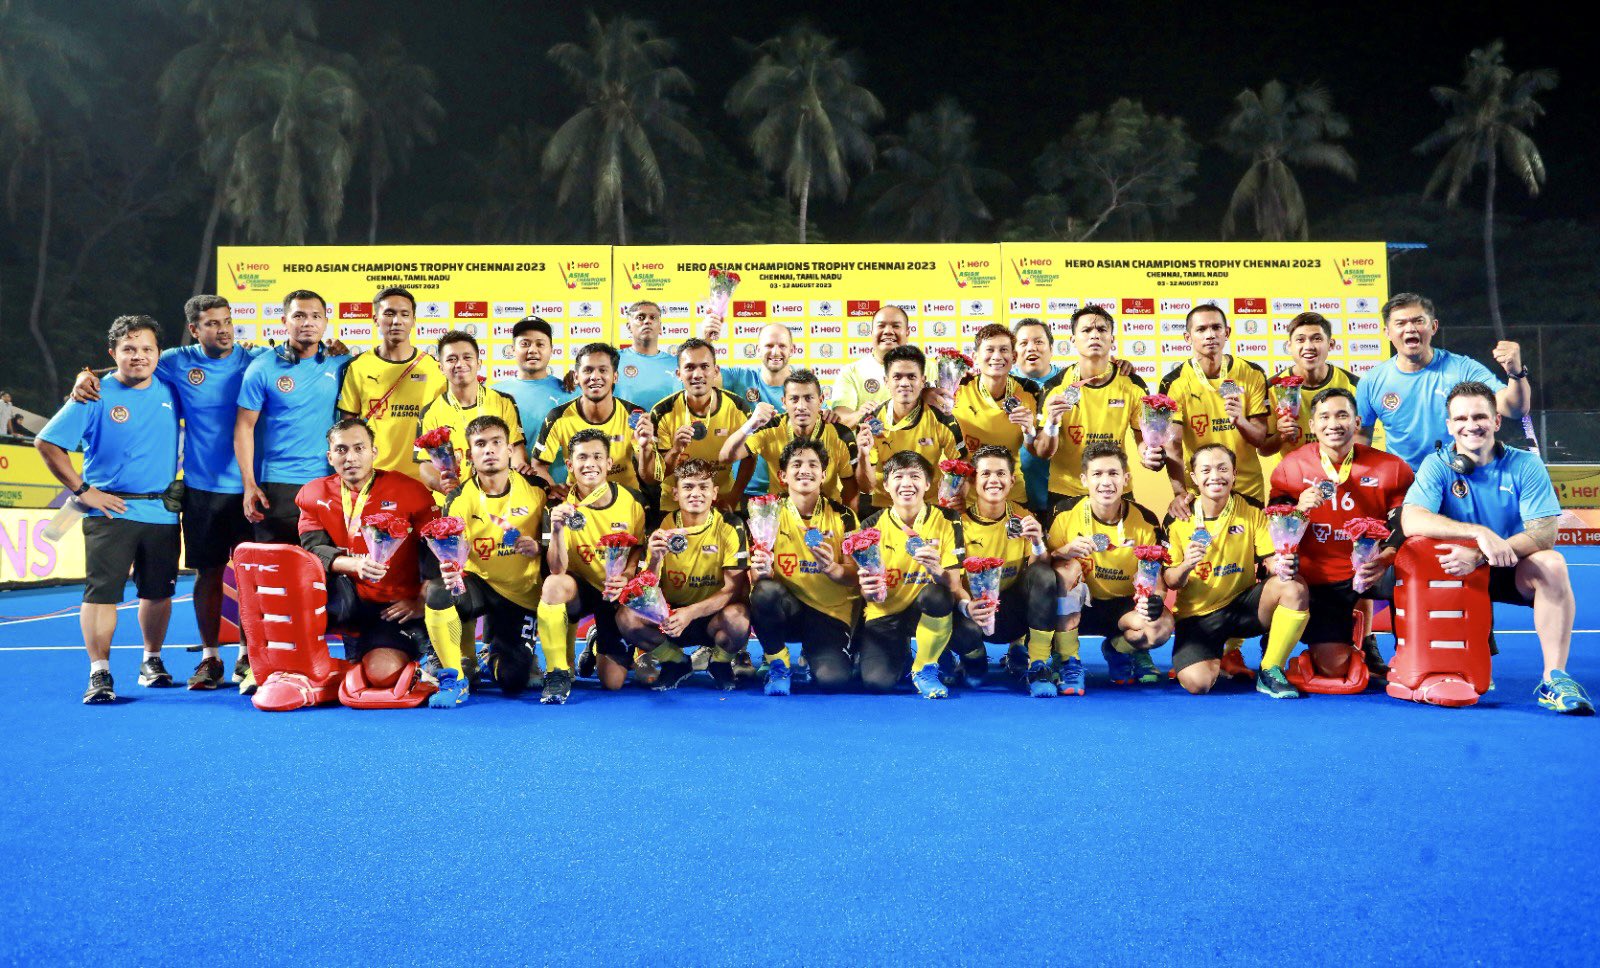 Speedy Tigers target Asiad gold to secure Olympics spot